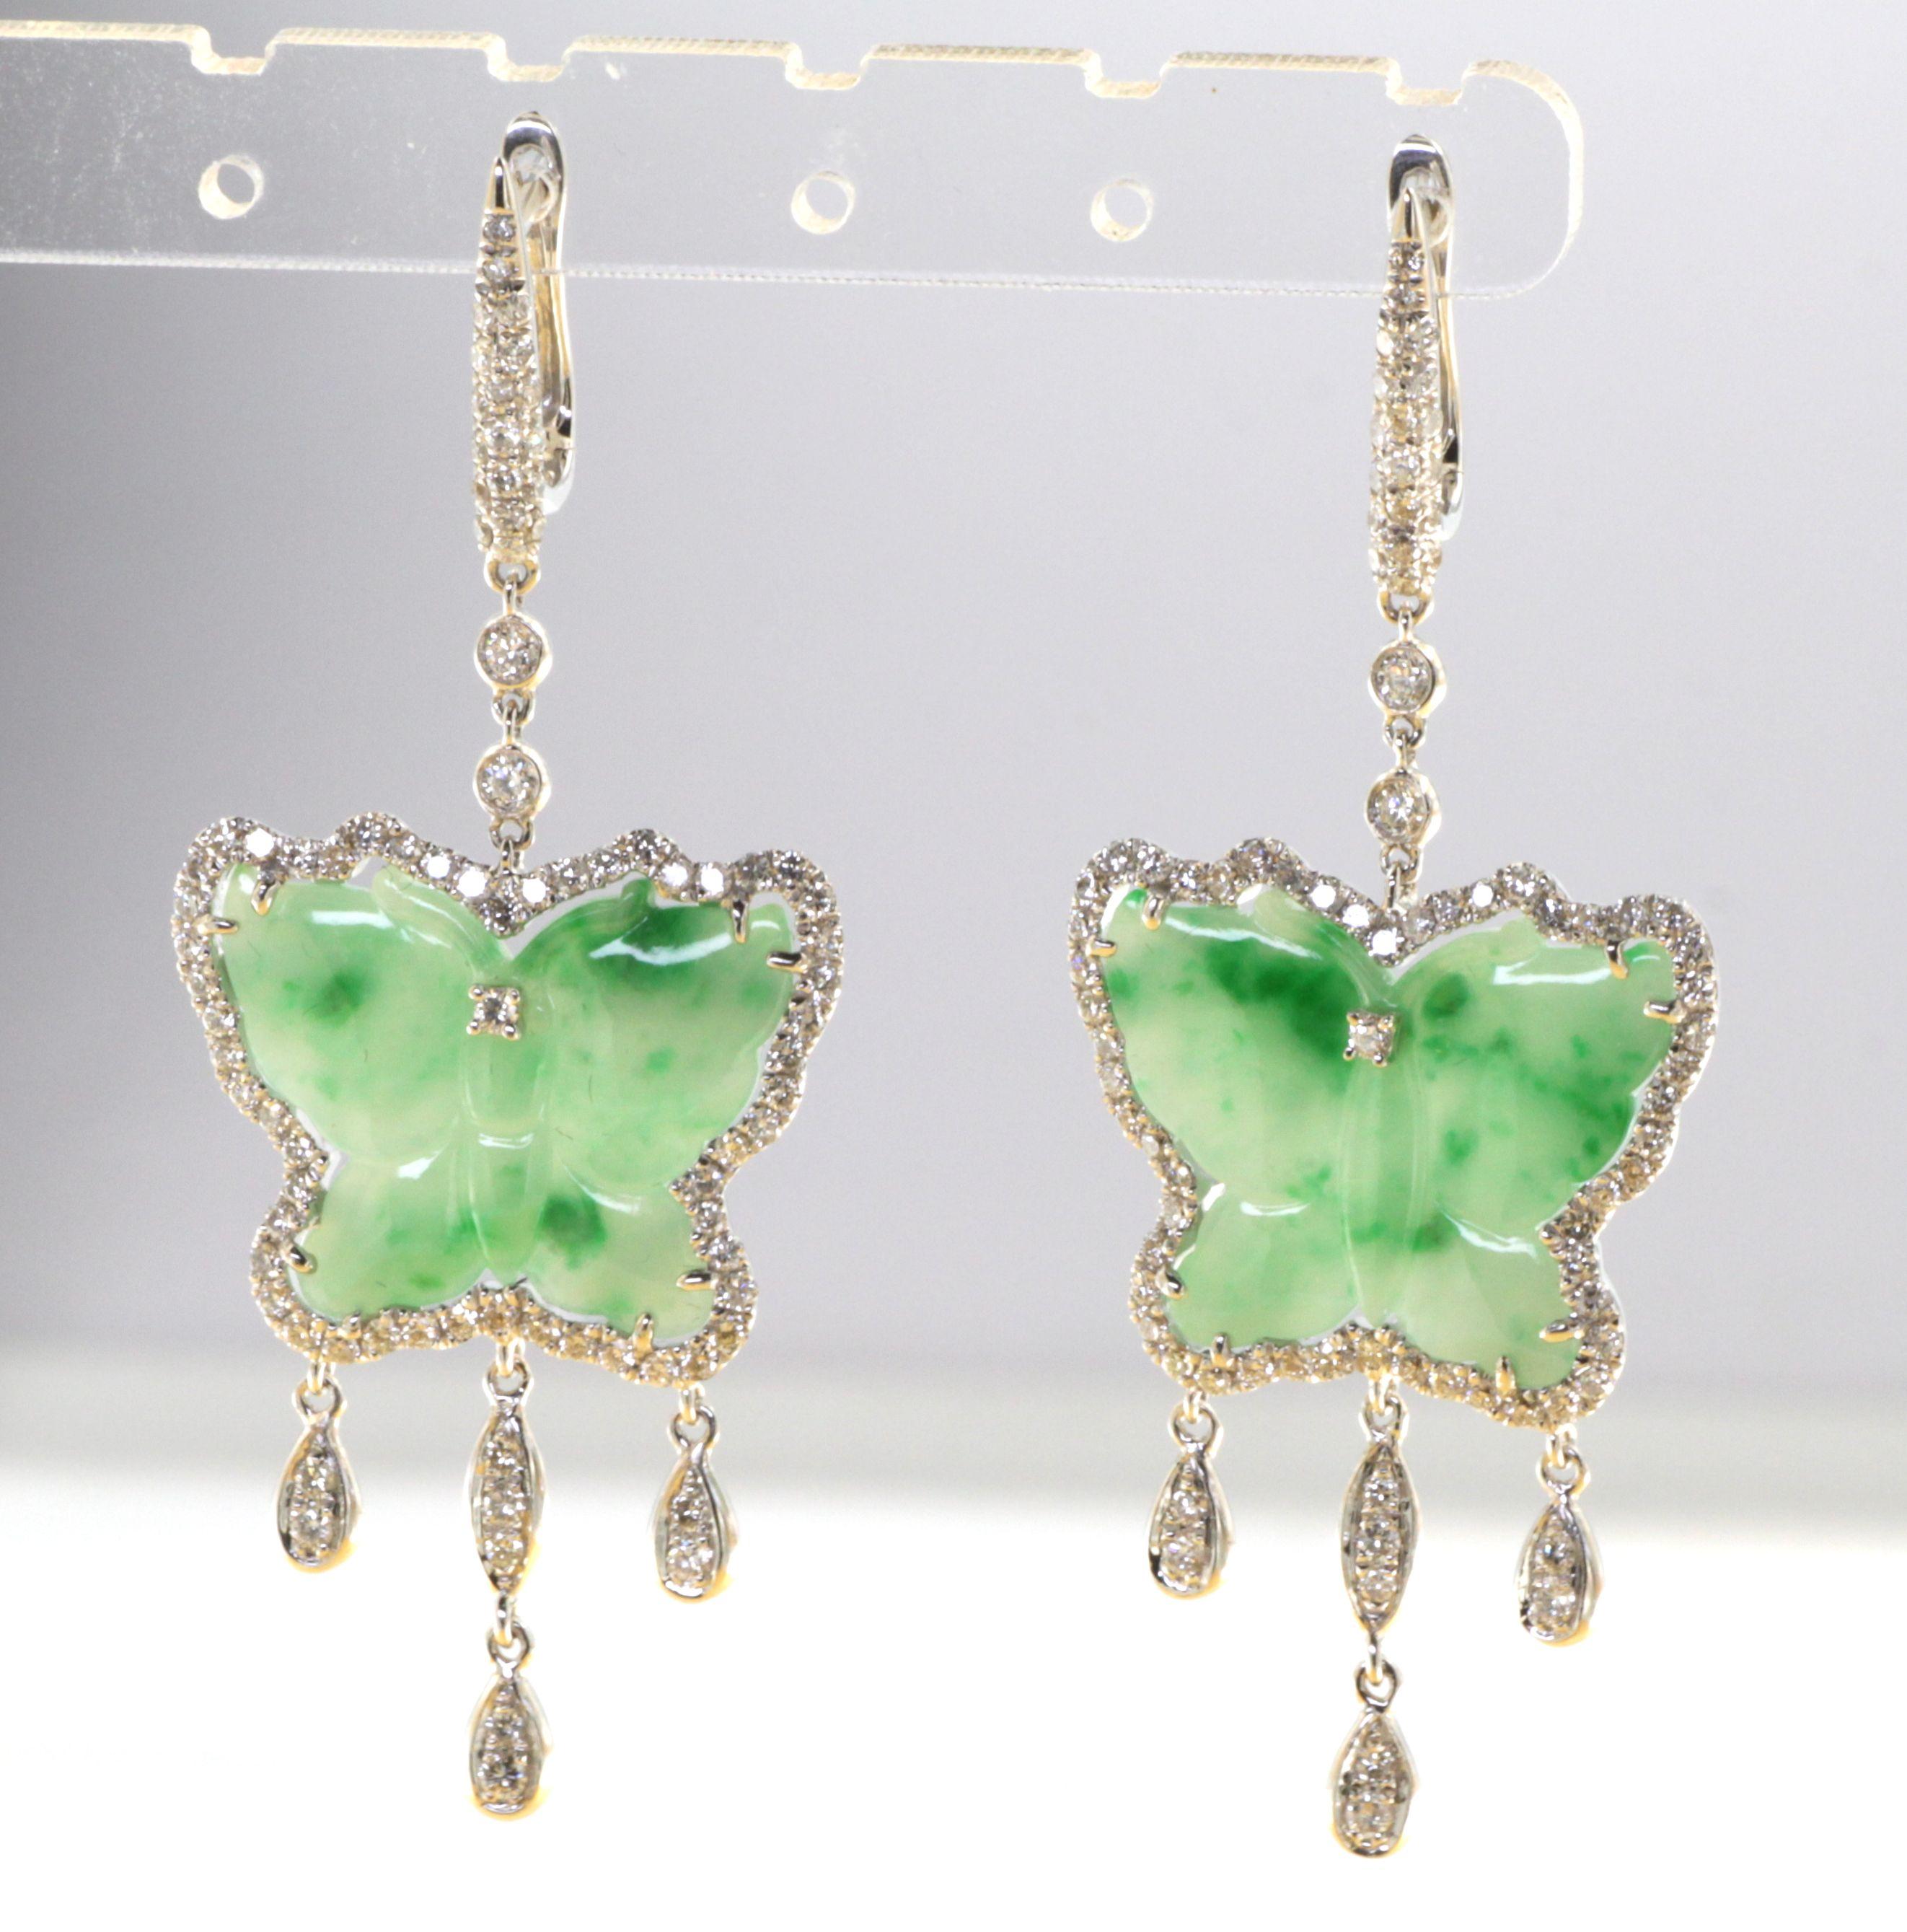 Introducing our captivating Vintage 14.85ct Butterfly Jade and Diamond Dangle Drop Earrings in 18k White Gold. These exquisite earrings exude timeless beauty and grace, combining the elegance of jade and the brilliance of diamonds.

The focal point